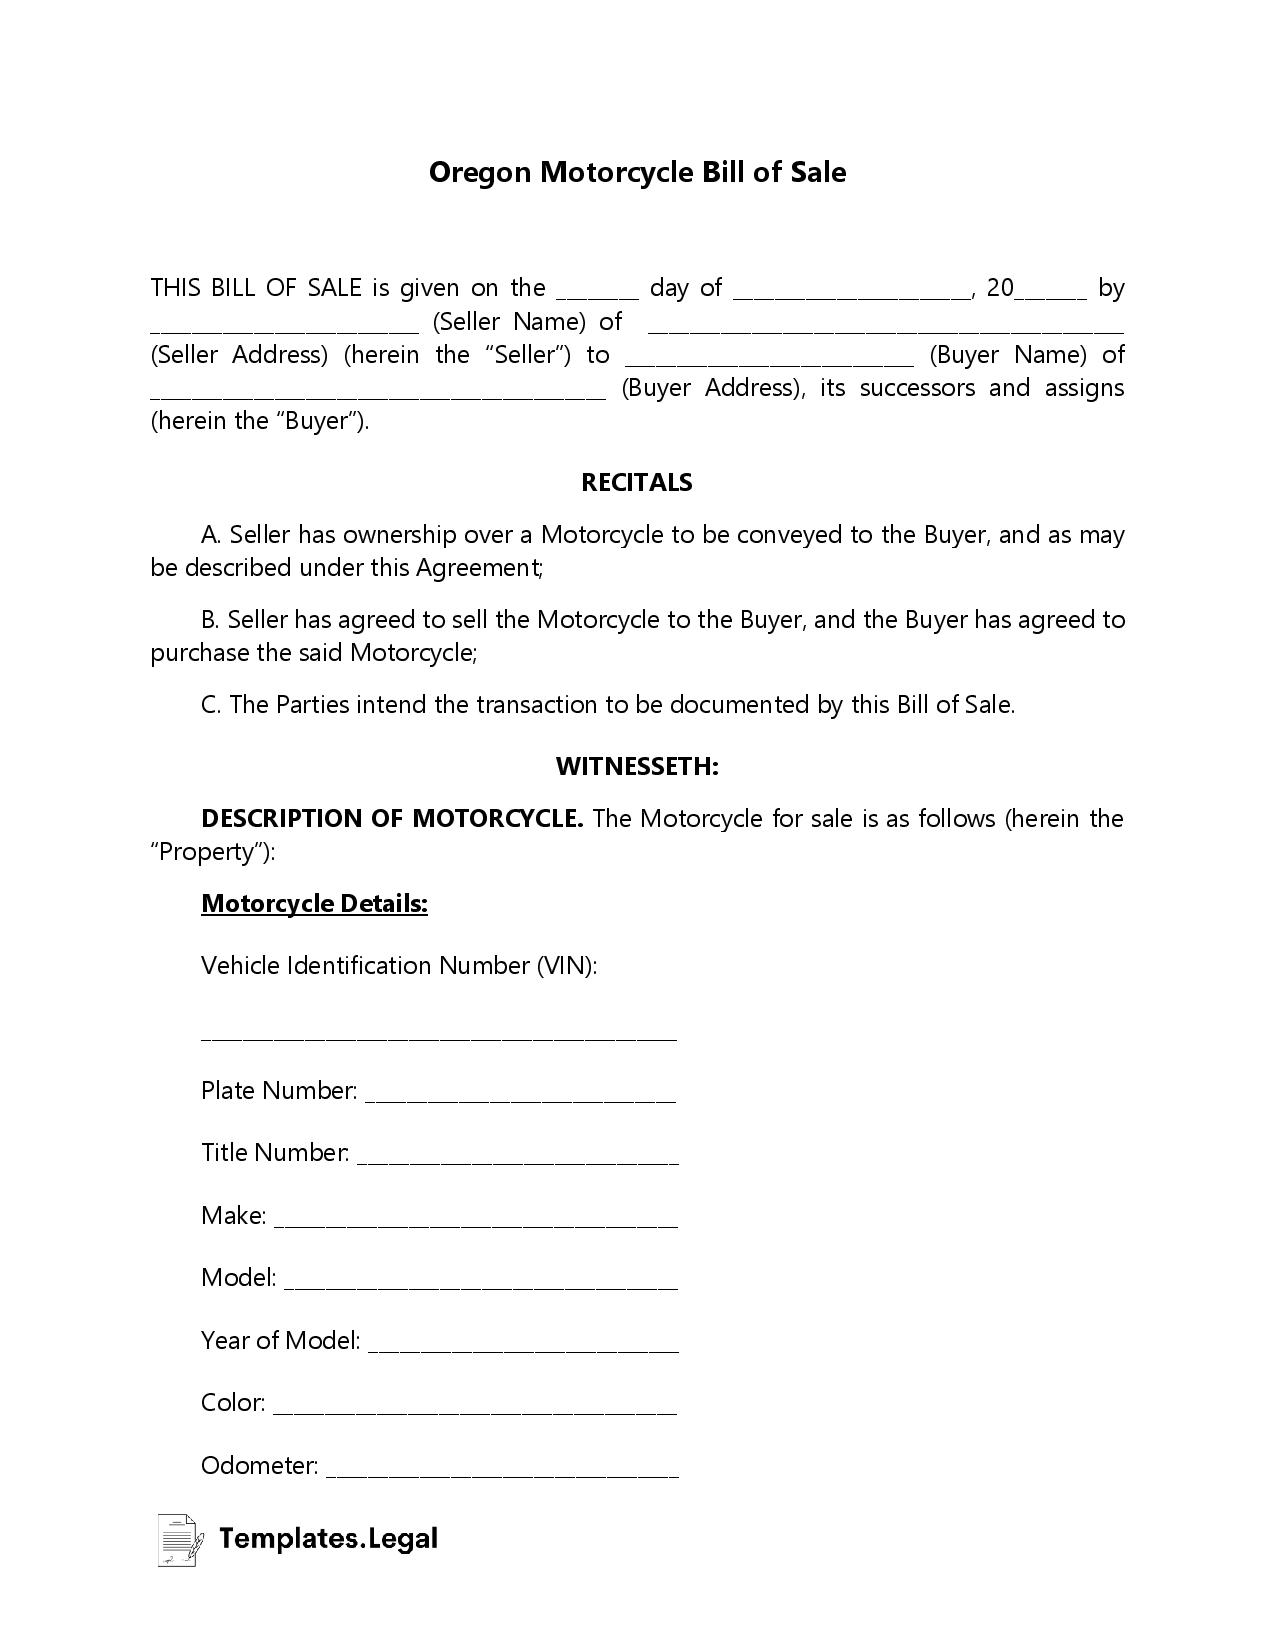 Oregon Motorcycle Bill of Sale - Templates.Legal